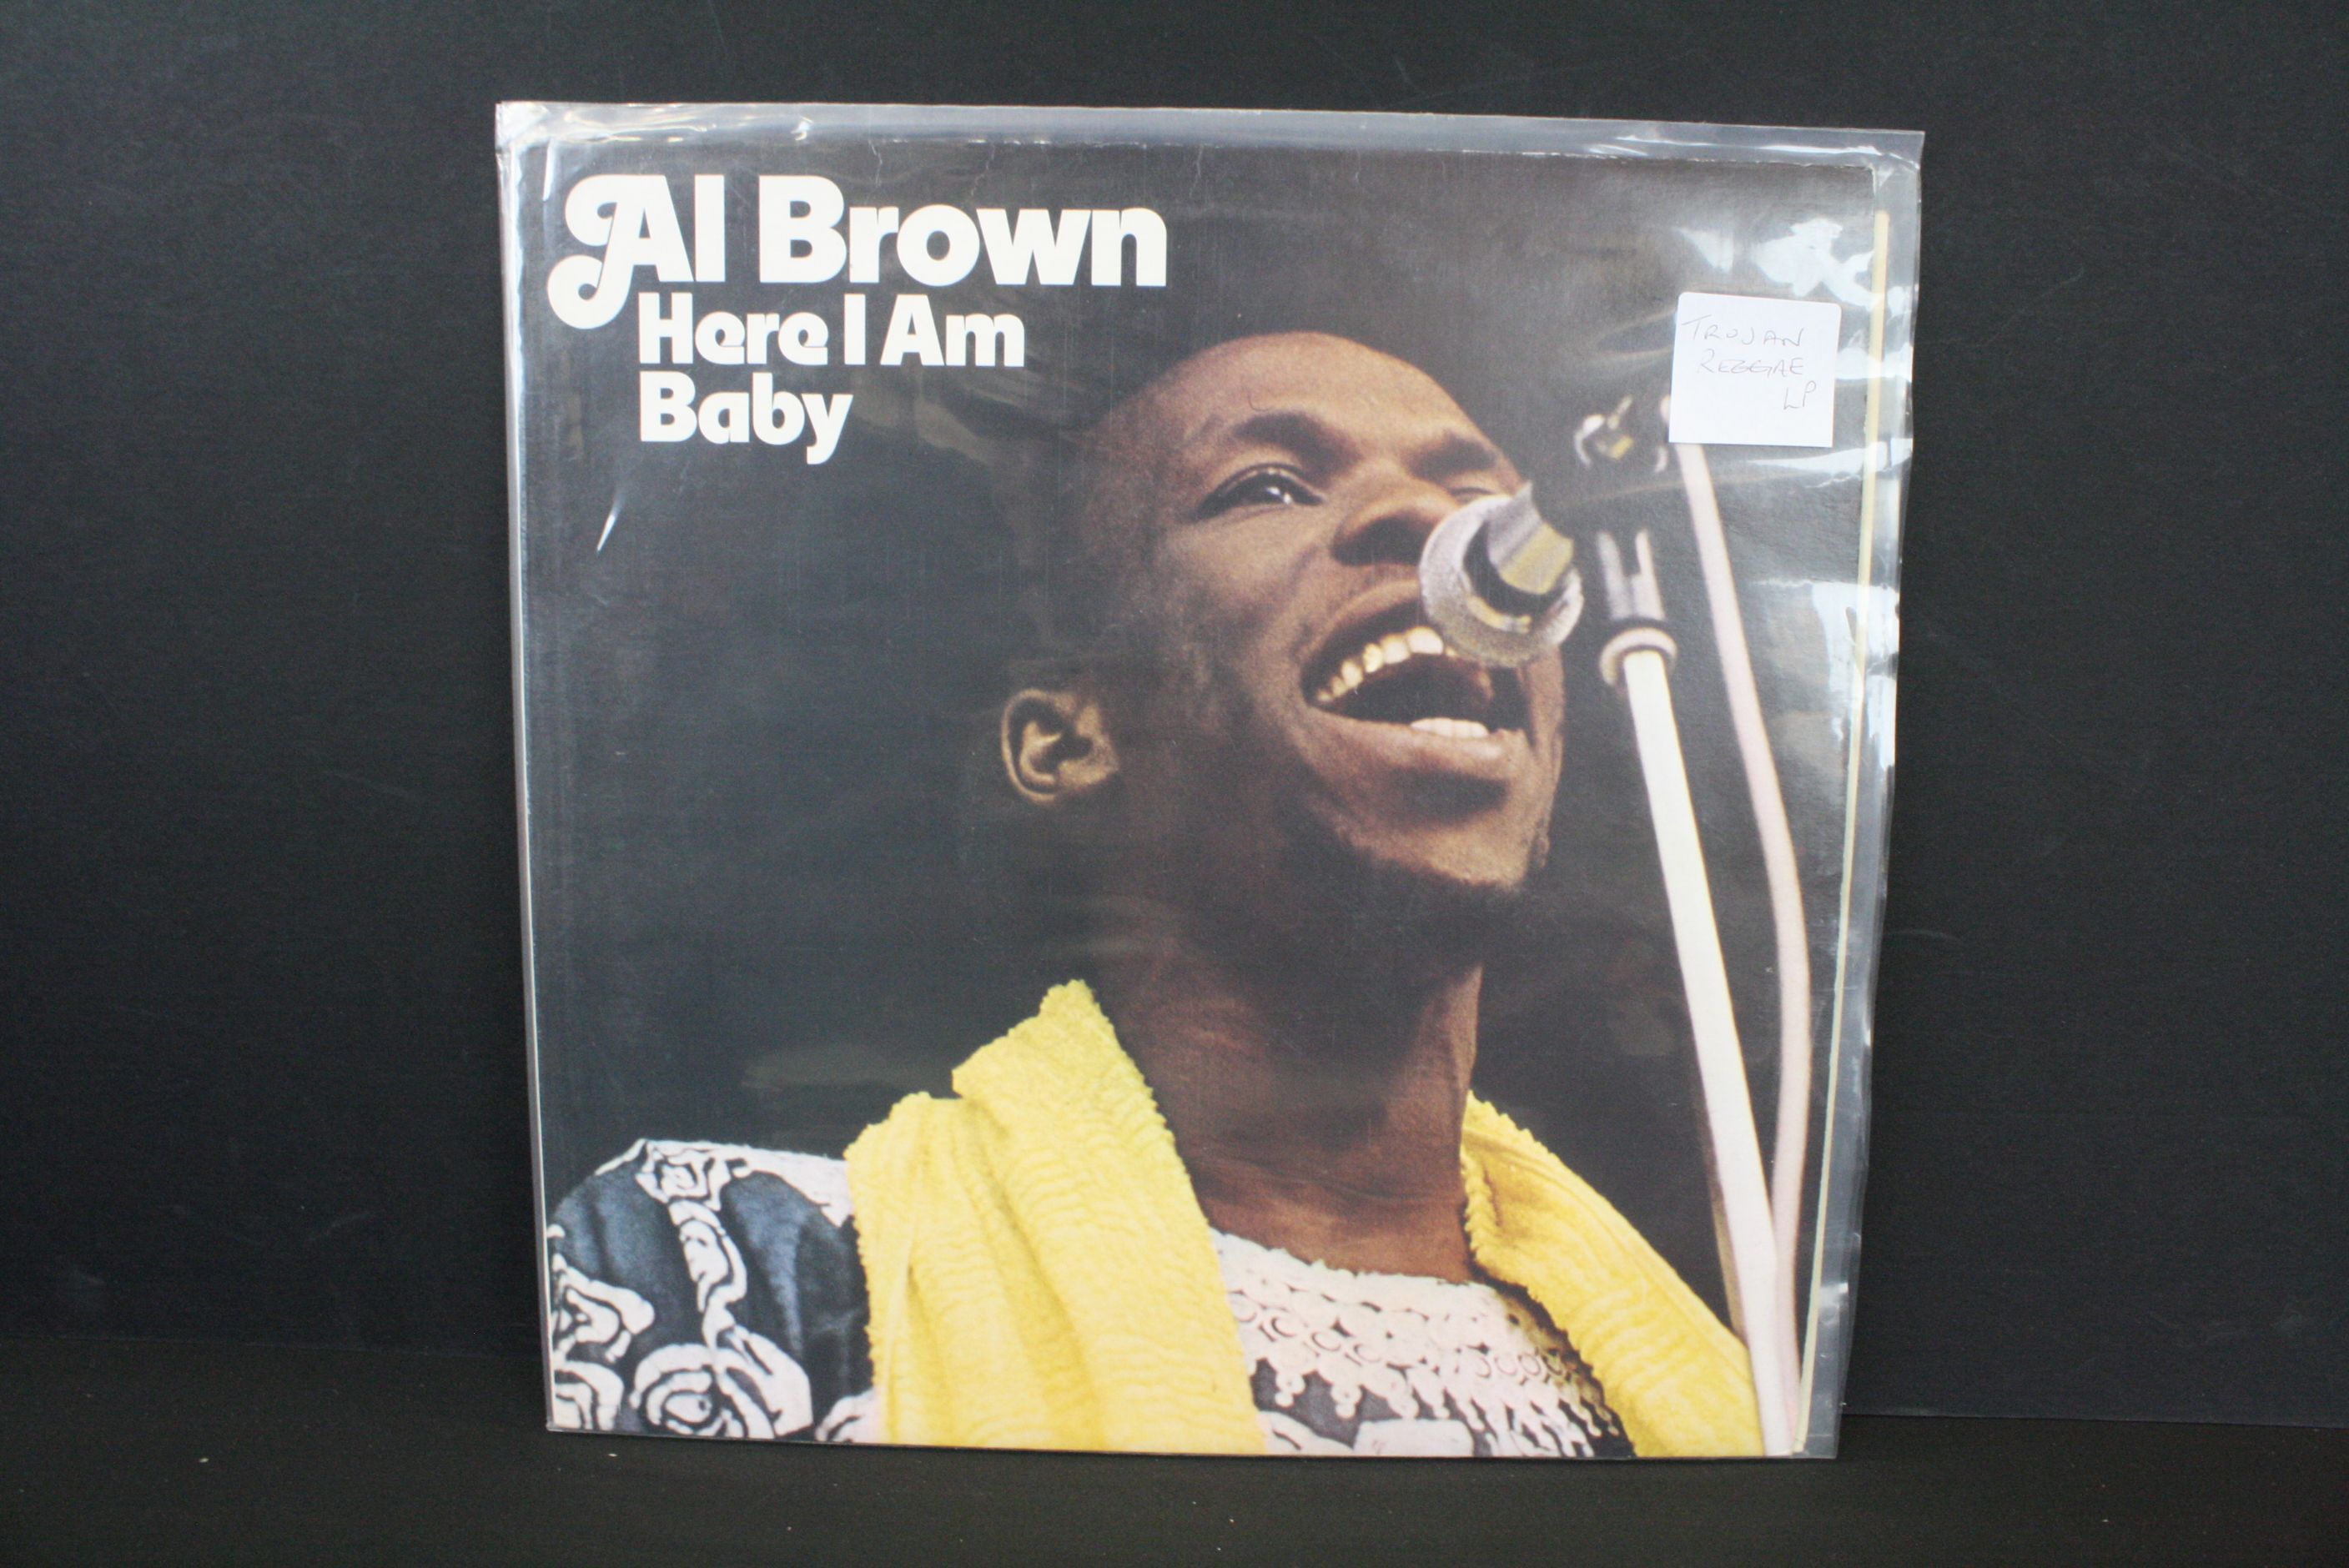 Vinyl - Trojan Records, 18 Rare Original UK albums Ska / Reggae, from the late 1960s and early - Image 18 of 19